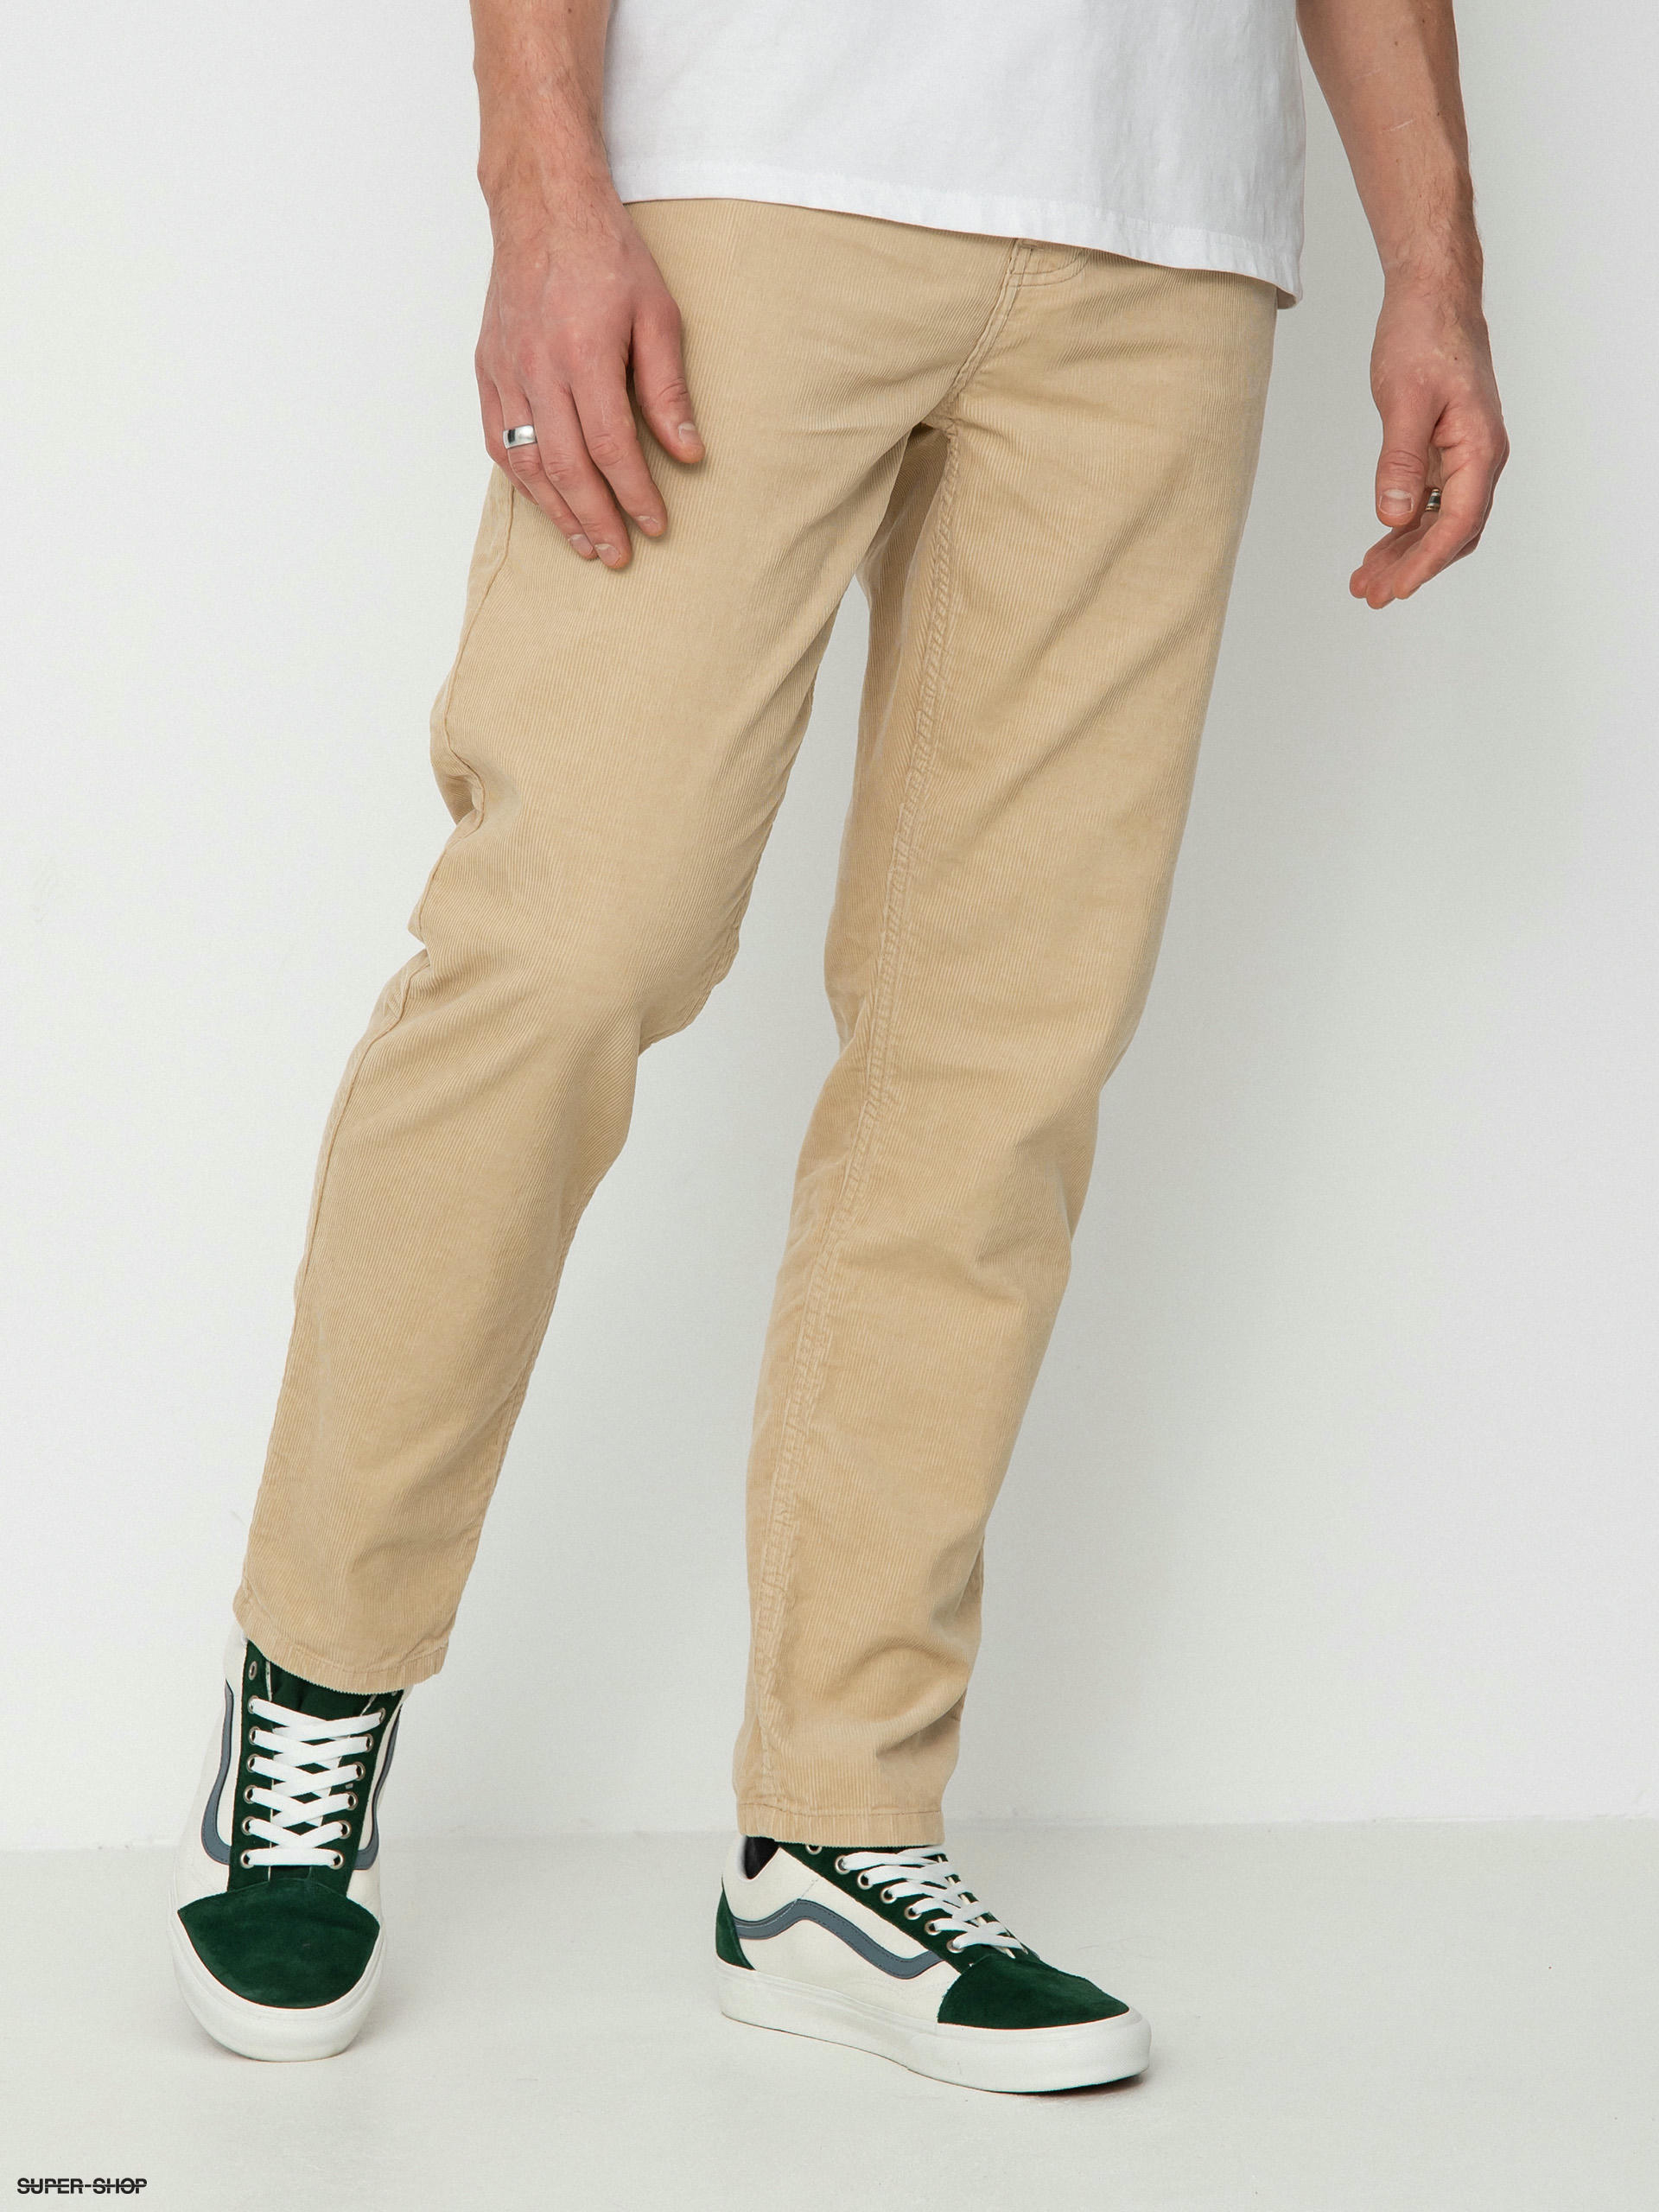 How To Cuff Fold And Pinroll Chinos Perfectly  Ready Sleek